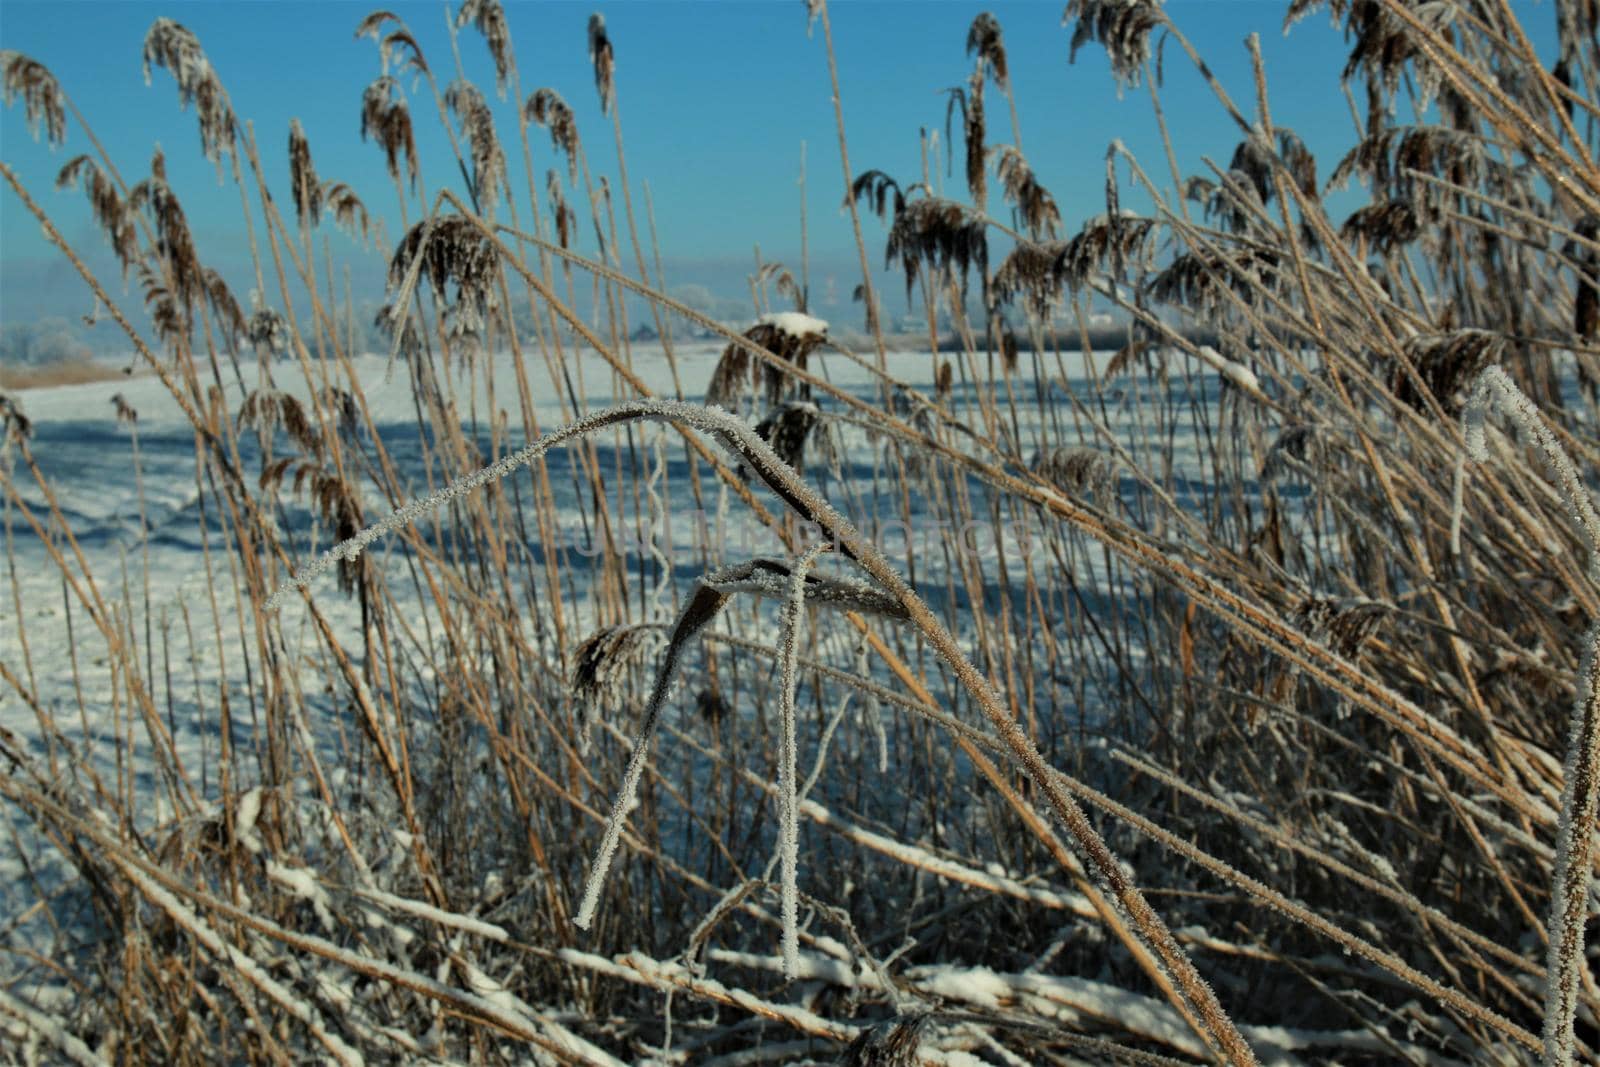 Iced reeds in front of a winter landscape by Luise123